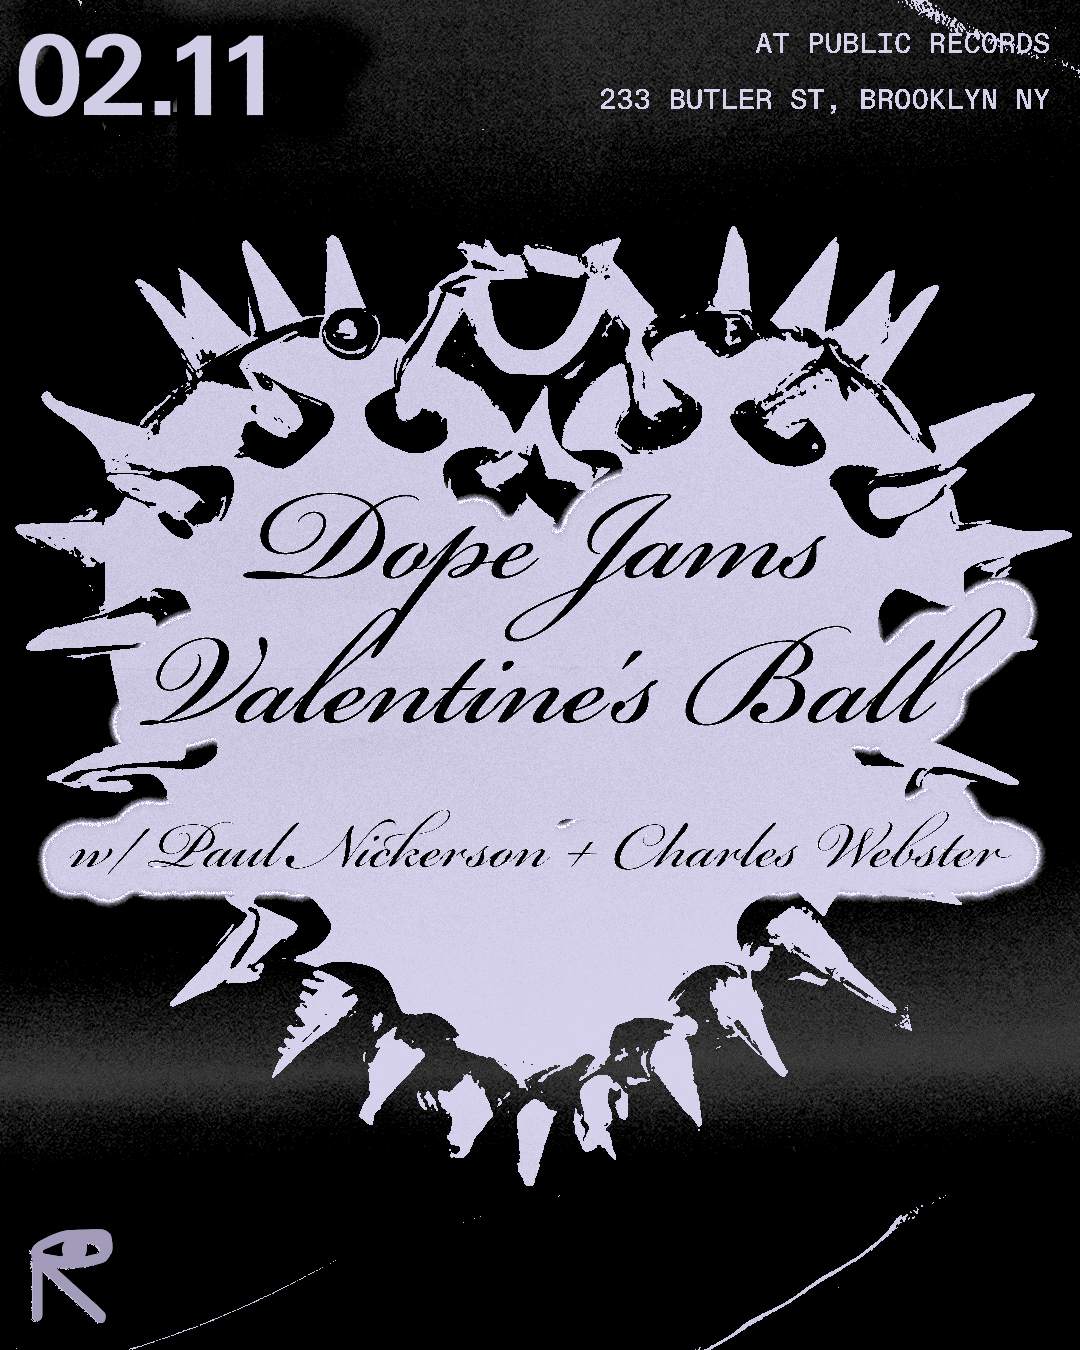 Dope Jams Valentine's Ball with Paul Nickerson + Charles Webster - Página frontal